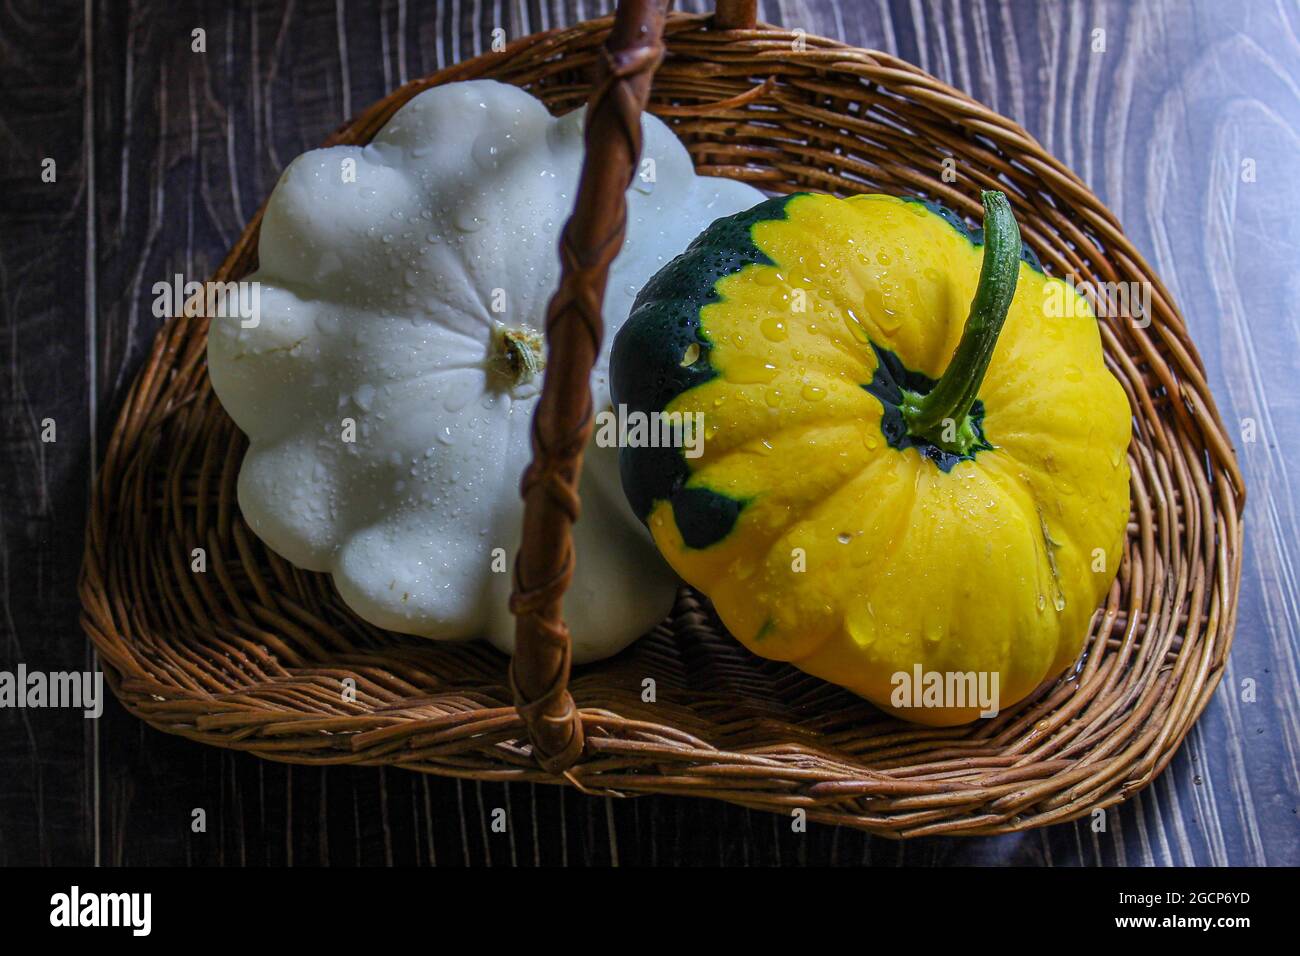 Colorful Squash in a Basket Stock Photo